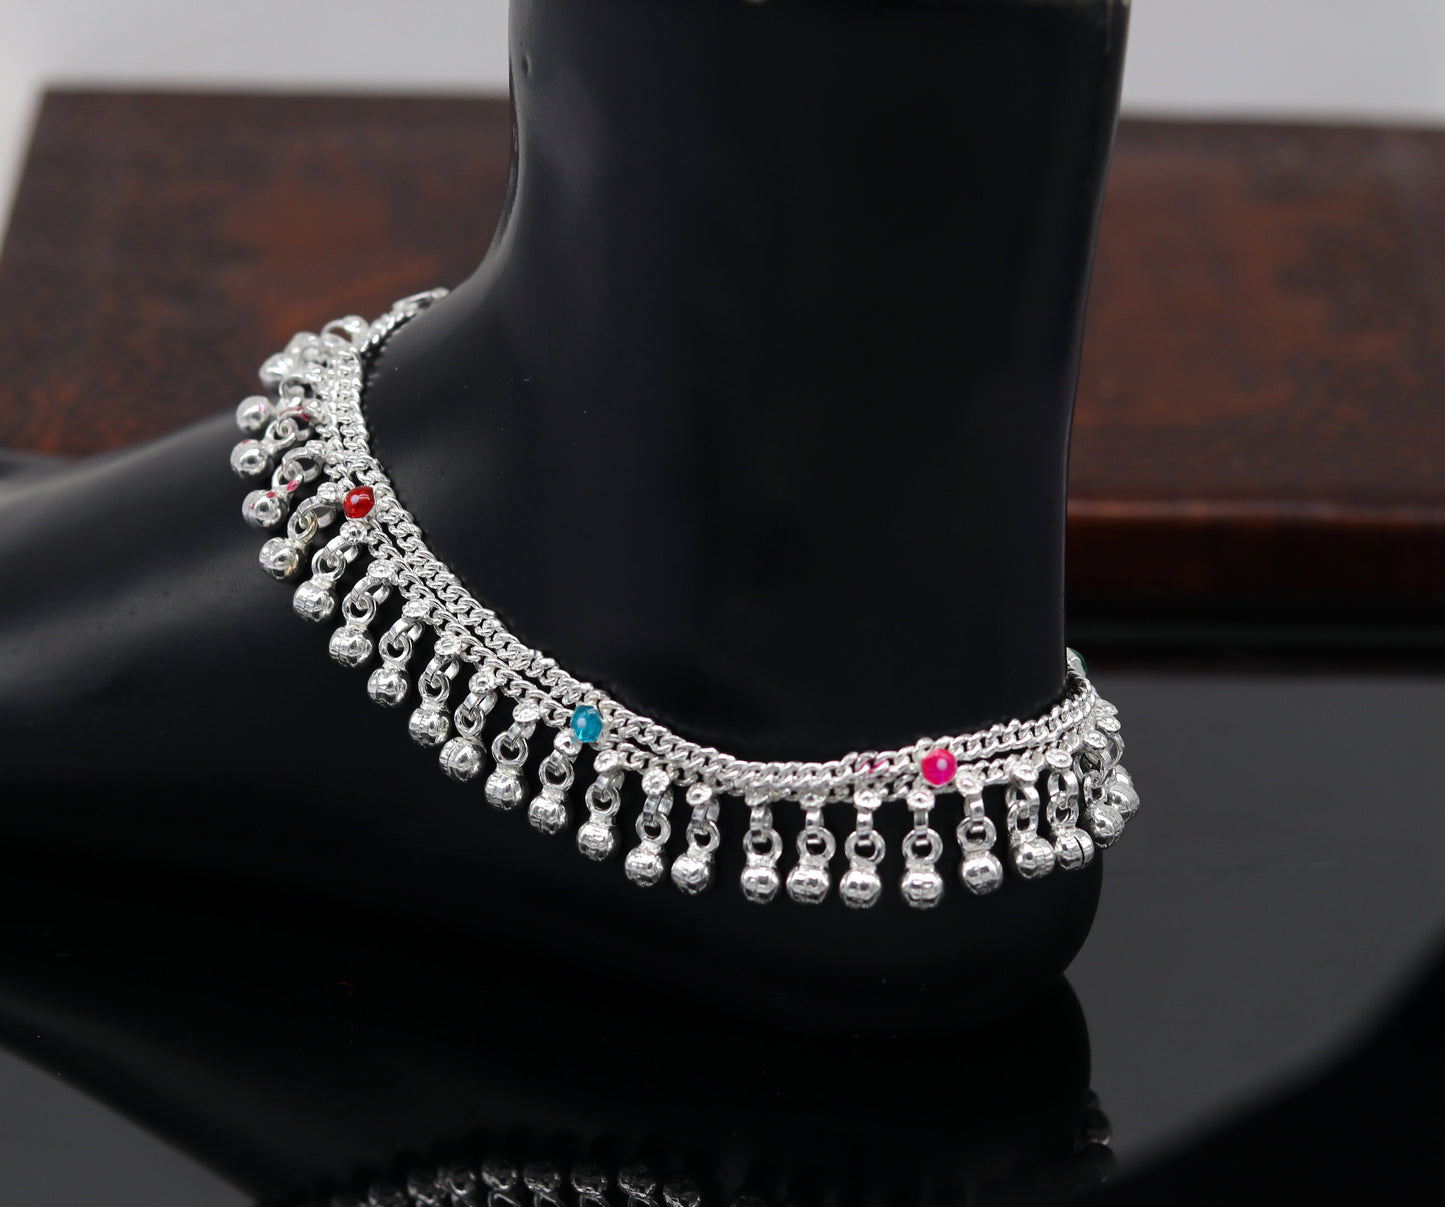 10.5" Sterling silver customized double chain anklets bracelet, jingling noisy ankles feet bracelet charm belly dance jewelry india ank260 - TRIBAL ORNAMENTS